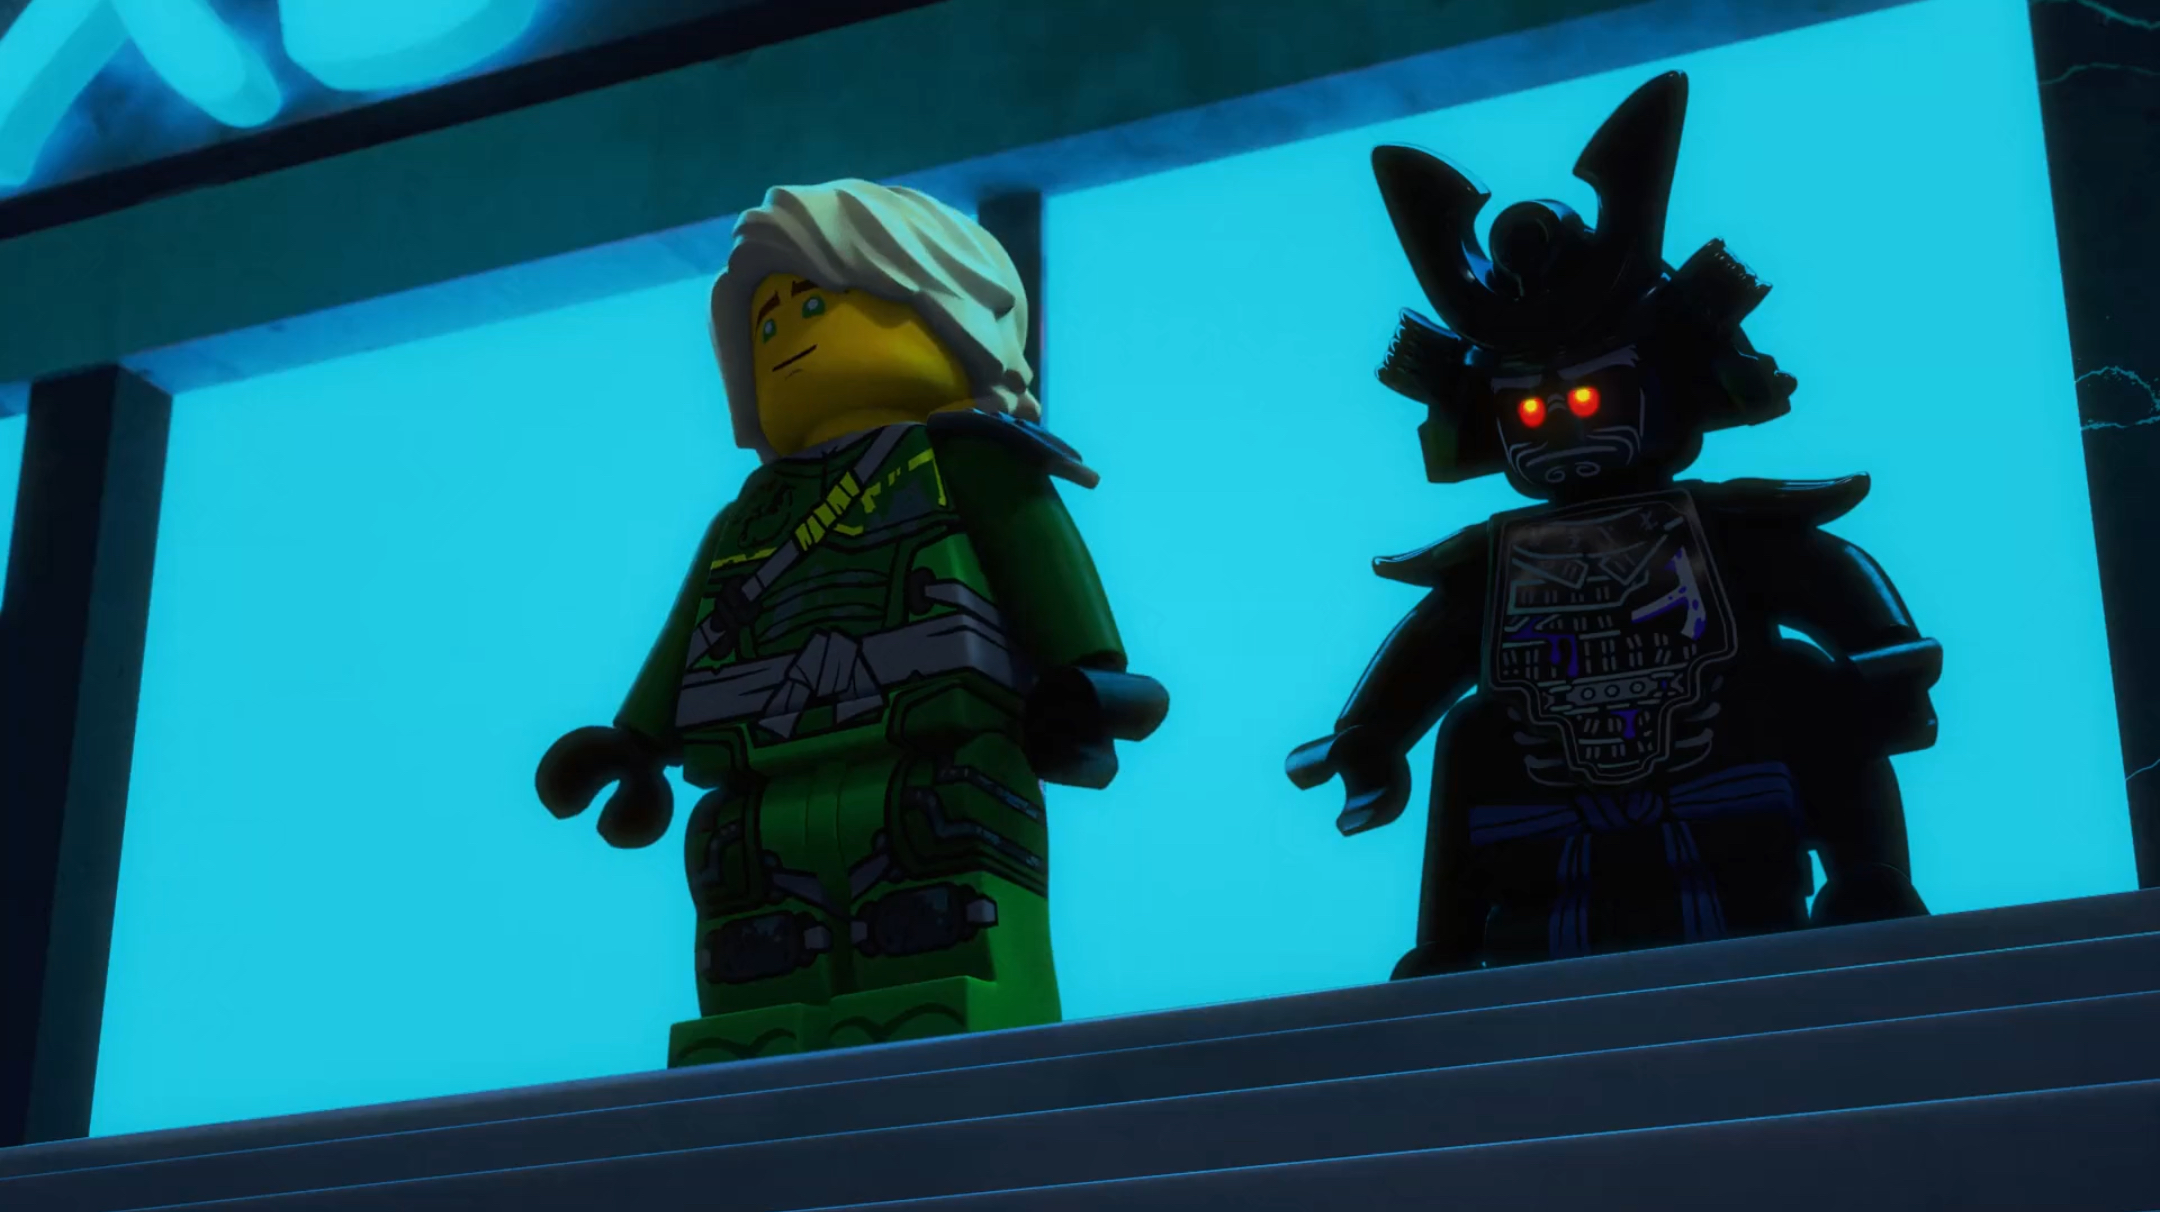 https://static.wikia.nocookie.net/ninjago/images/8/84/2018-07-19_16_32_40-Greenshot.png/revision/latest?cb=20210420071153